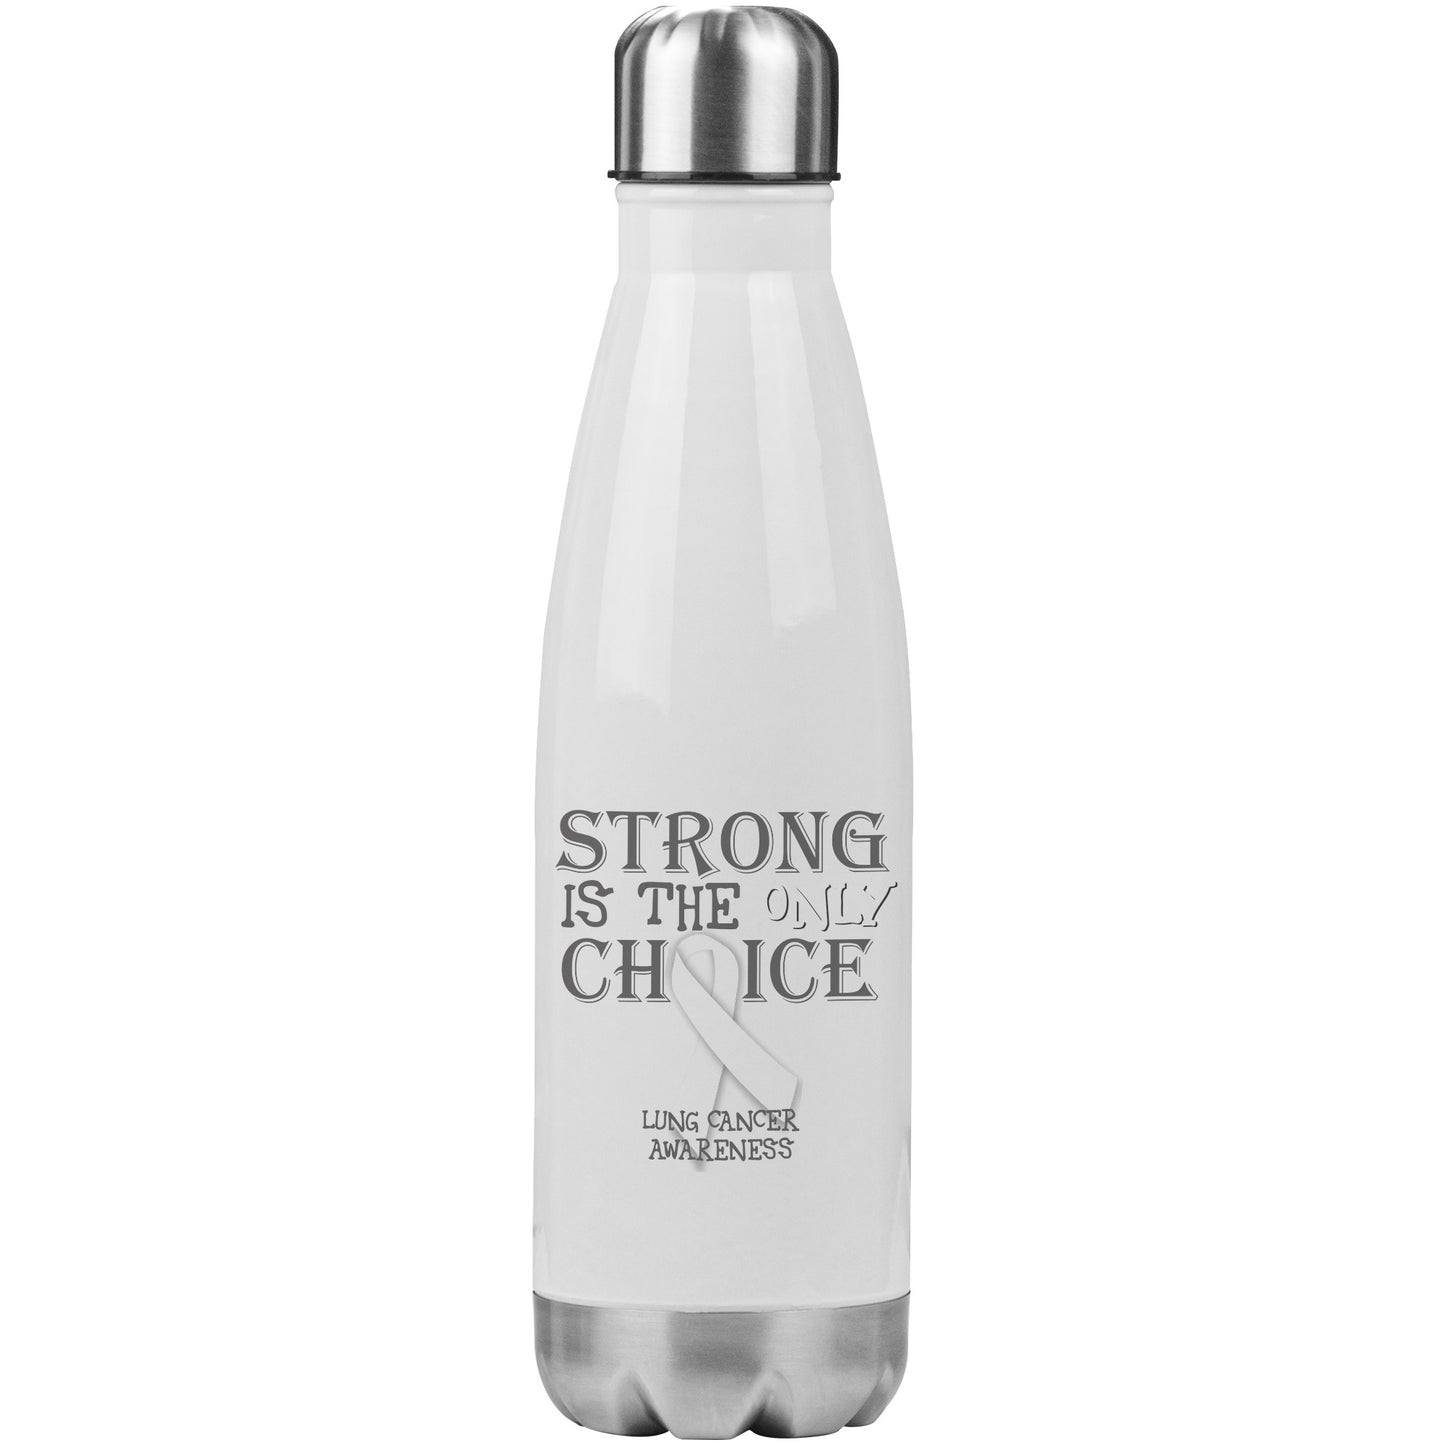 Strong is the Only Choice -Lung Cancer 20oz Insulated Water Bottle